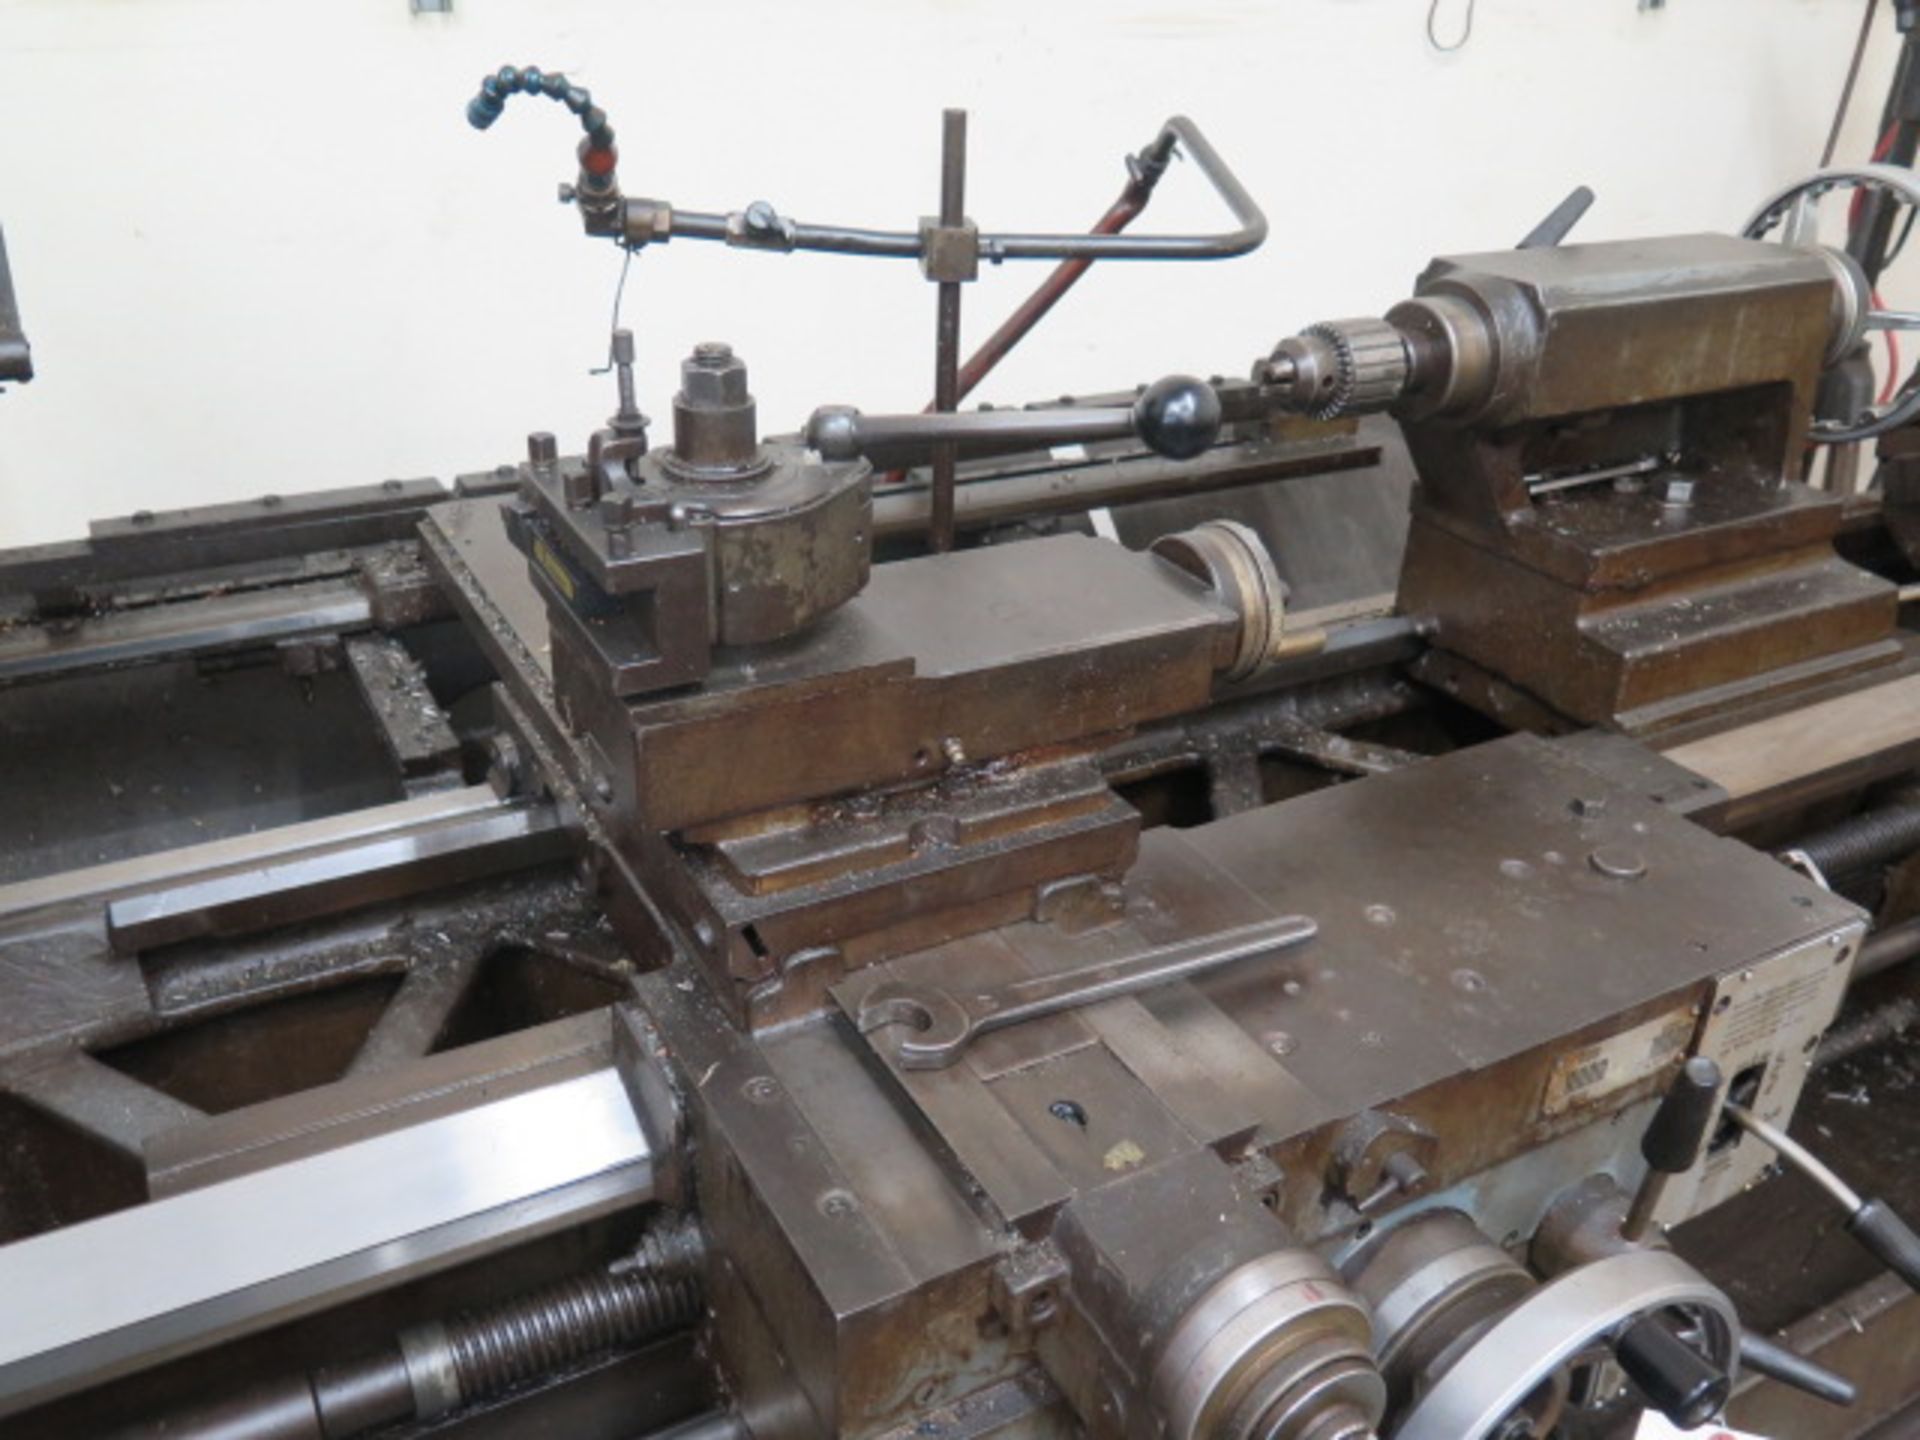 HES 20 20” x 72” Geared Head Gap Bed Lathe w/ 45-1800 RPM, Tracer Bed, Inch/mm Threading, Tailstock, - Image 7 of 12